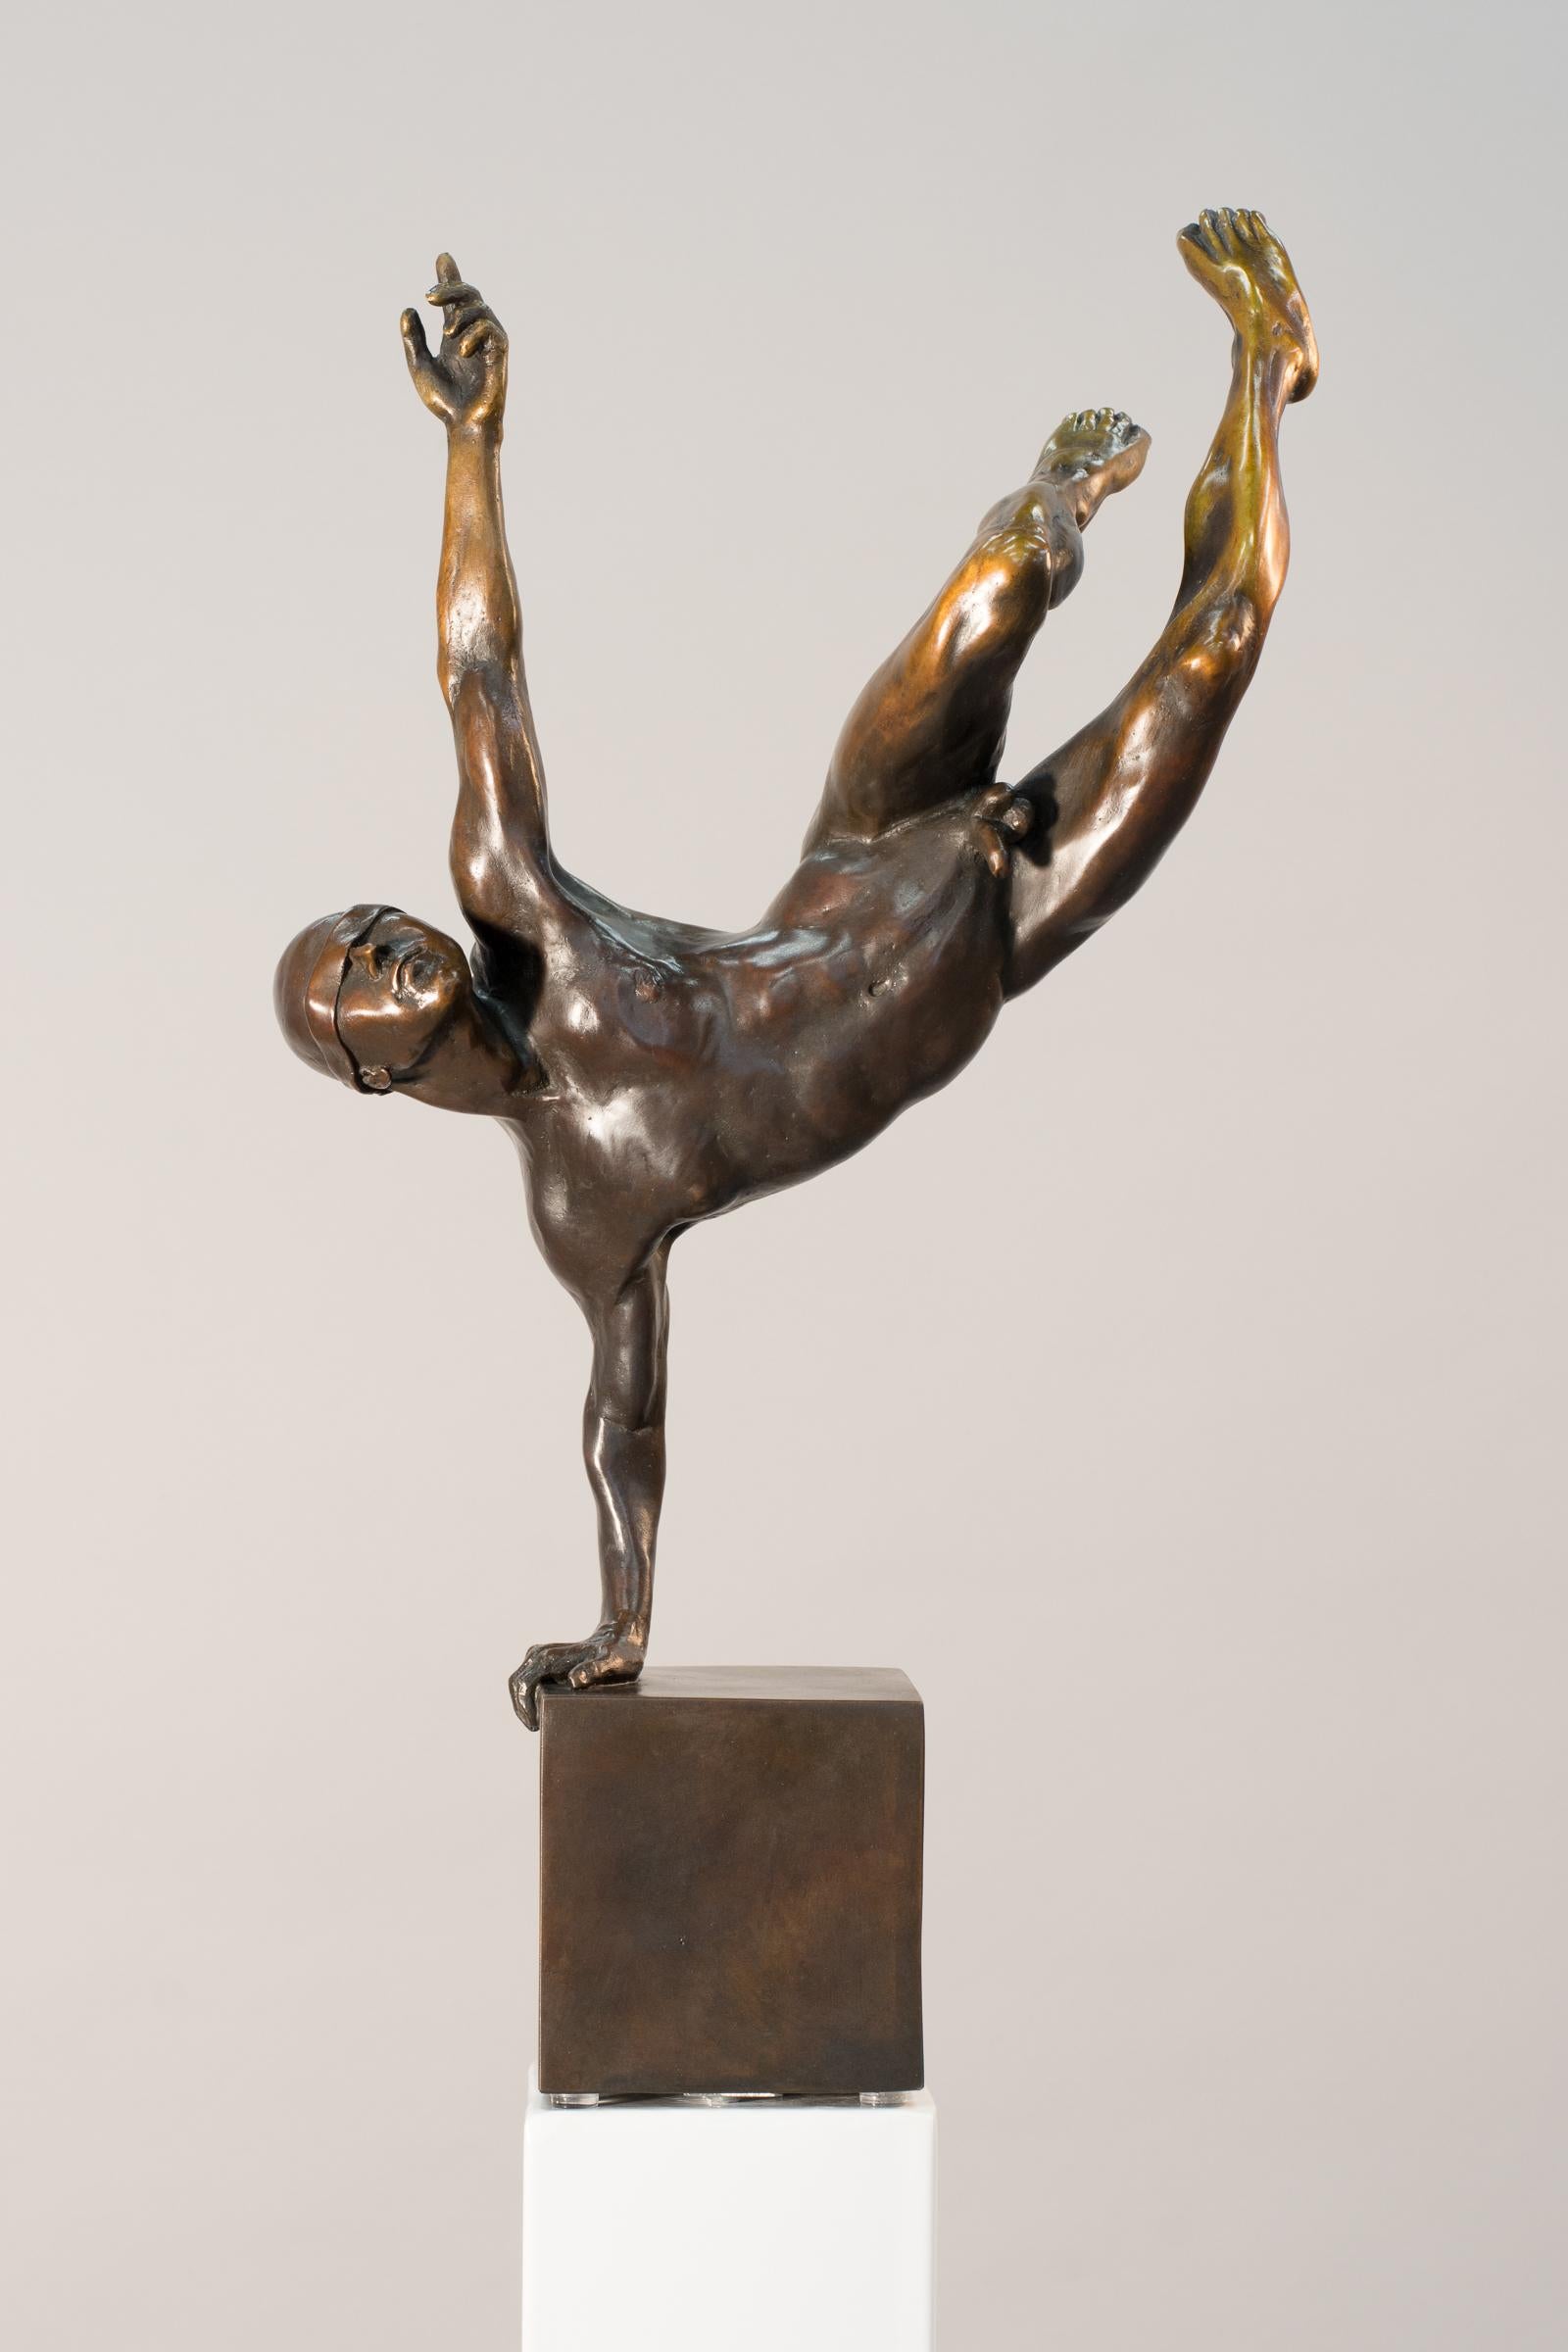 W.W. Hung Figurative Sculpture - Yearning 1/9 - male, nude, figurative, statuette, bronze sculpture